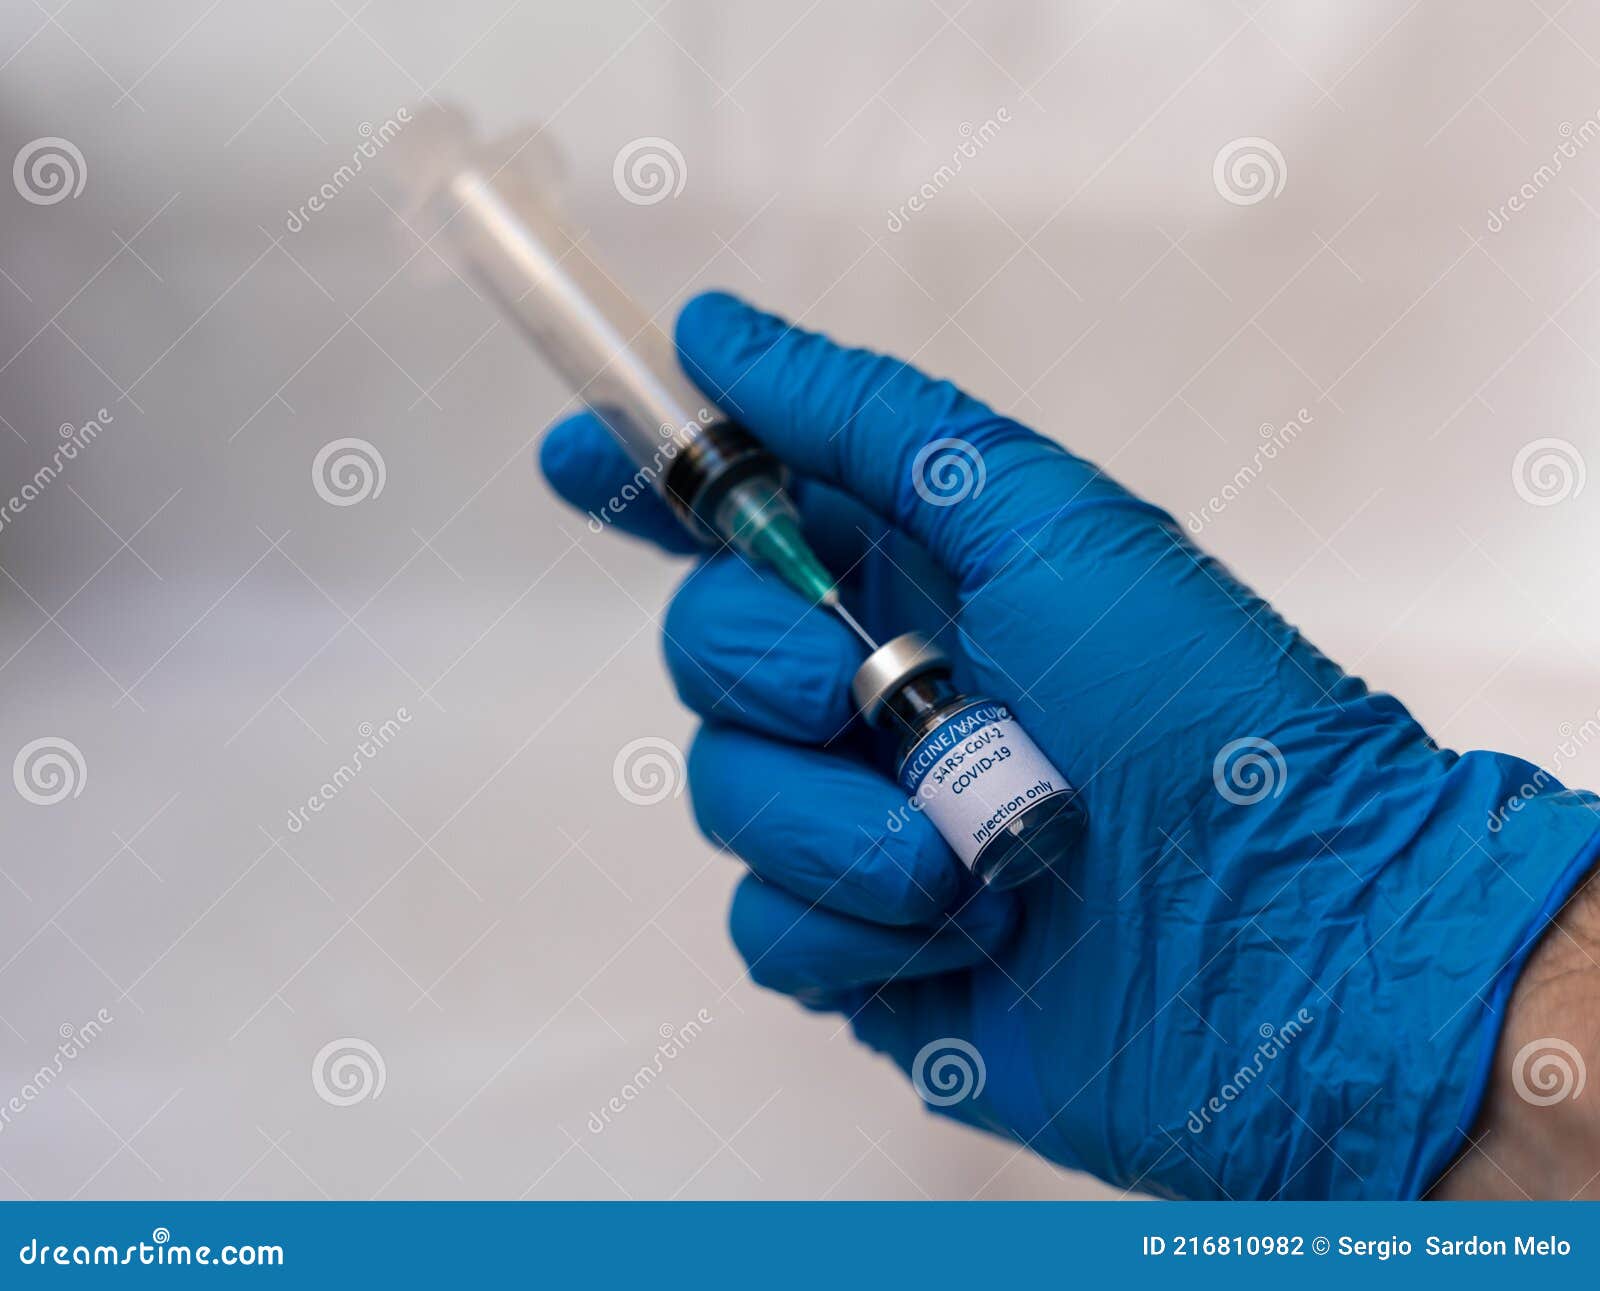 preparing covid-19 vaccine for injection